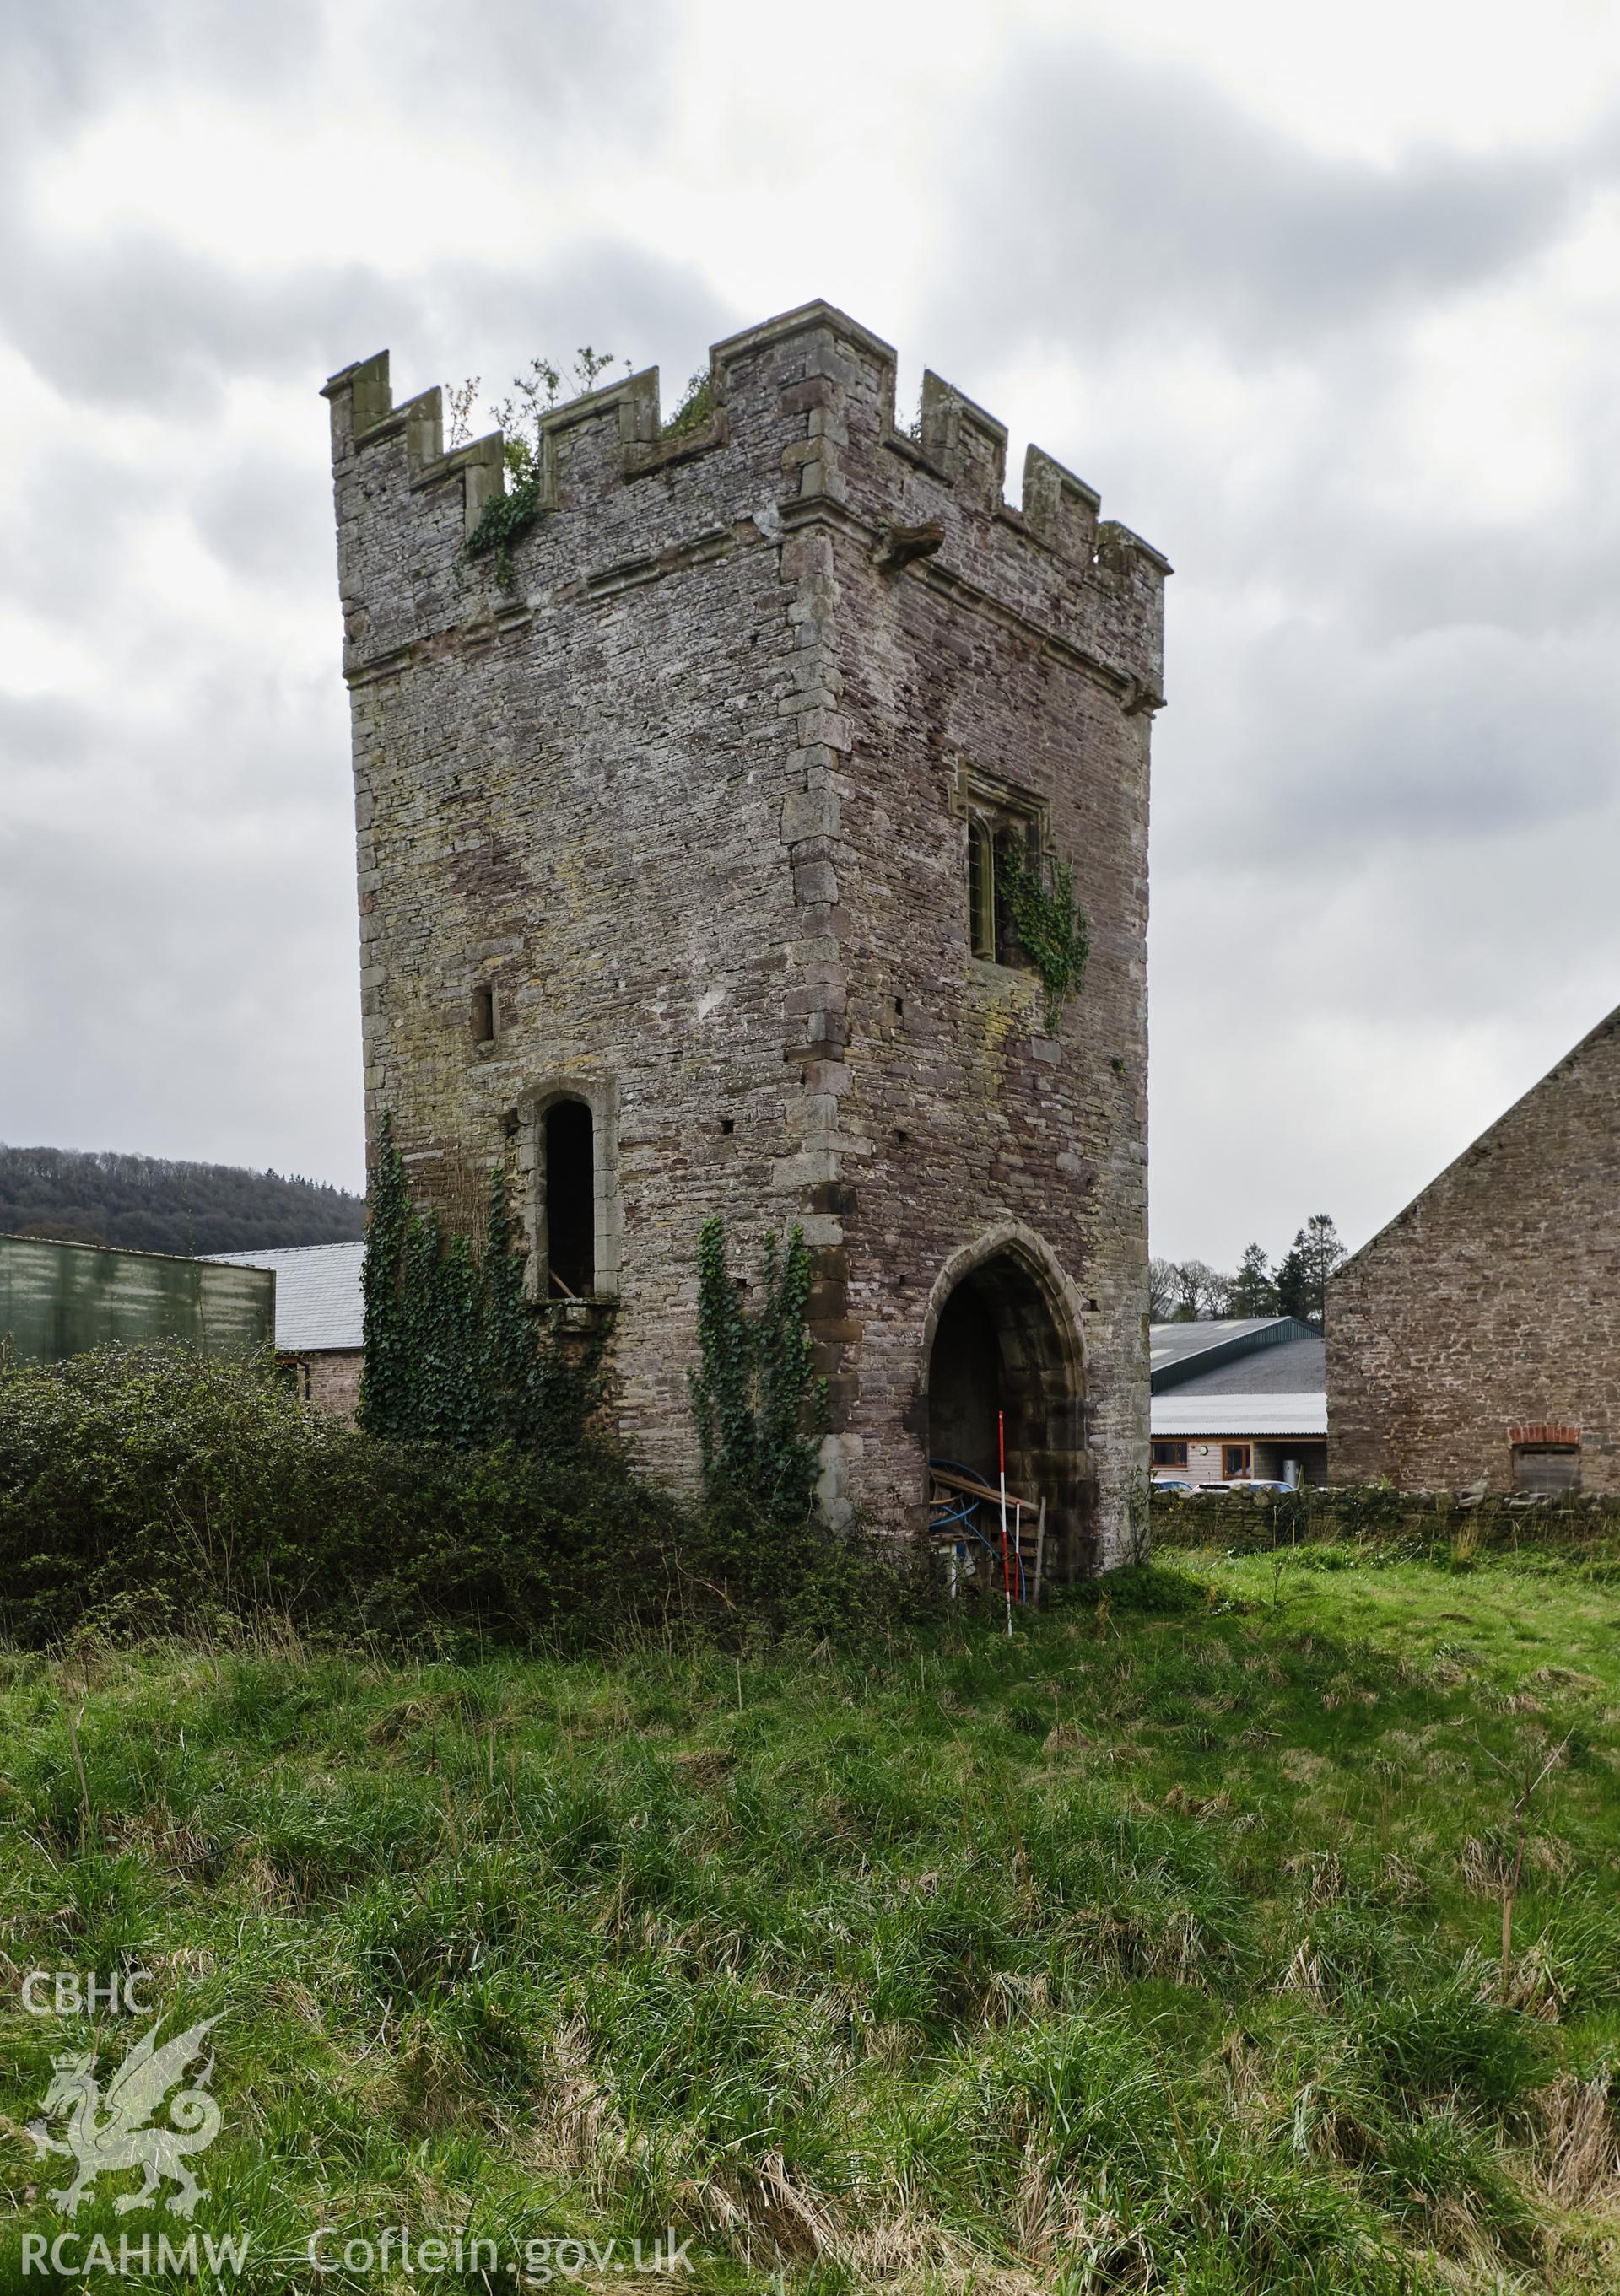 Colour photograph showing Great Porthmel Gatehouse - NE front looking S. Produced as part of Historic Building Recording for Great Porthamel Gatehouse, carried out by Richard Hayman, April 2021.